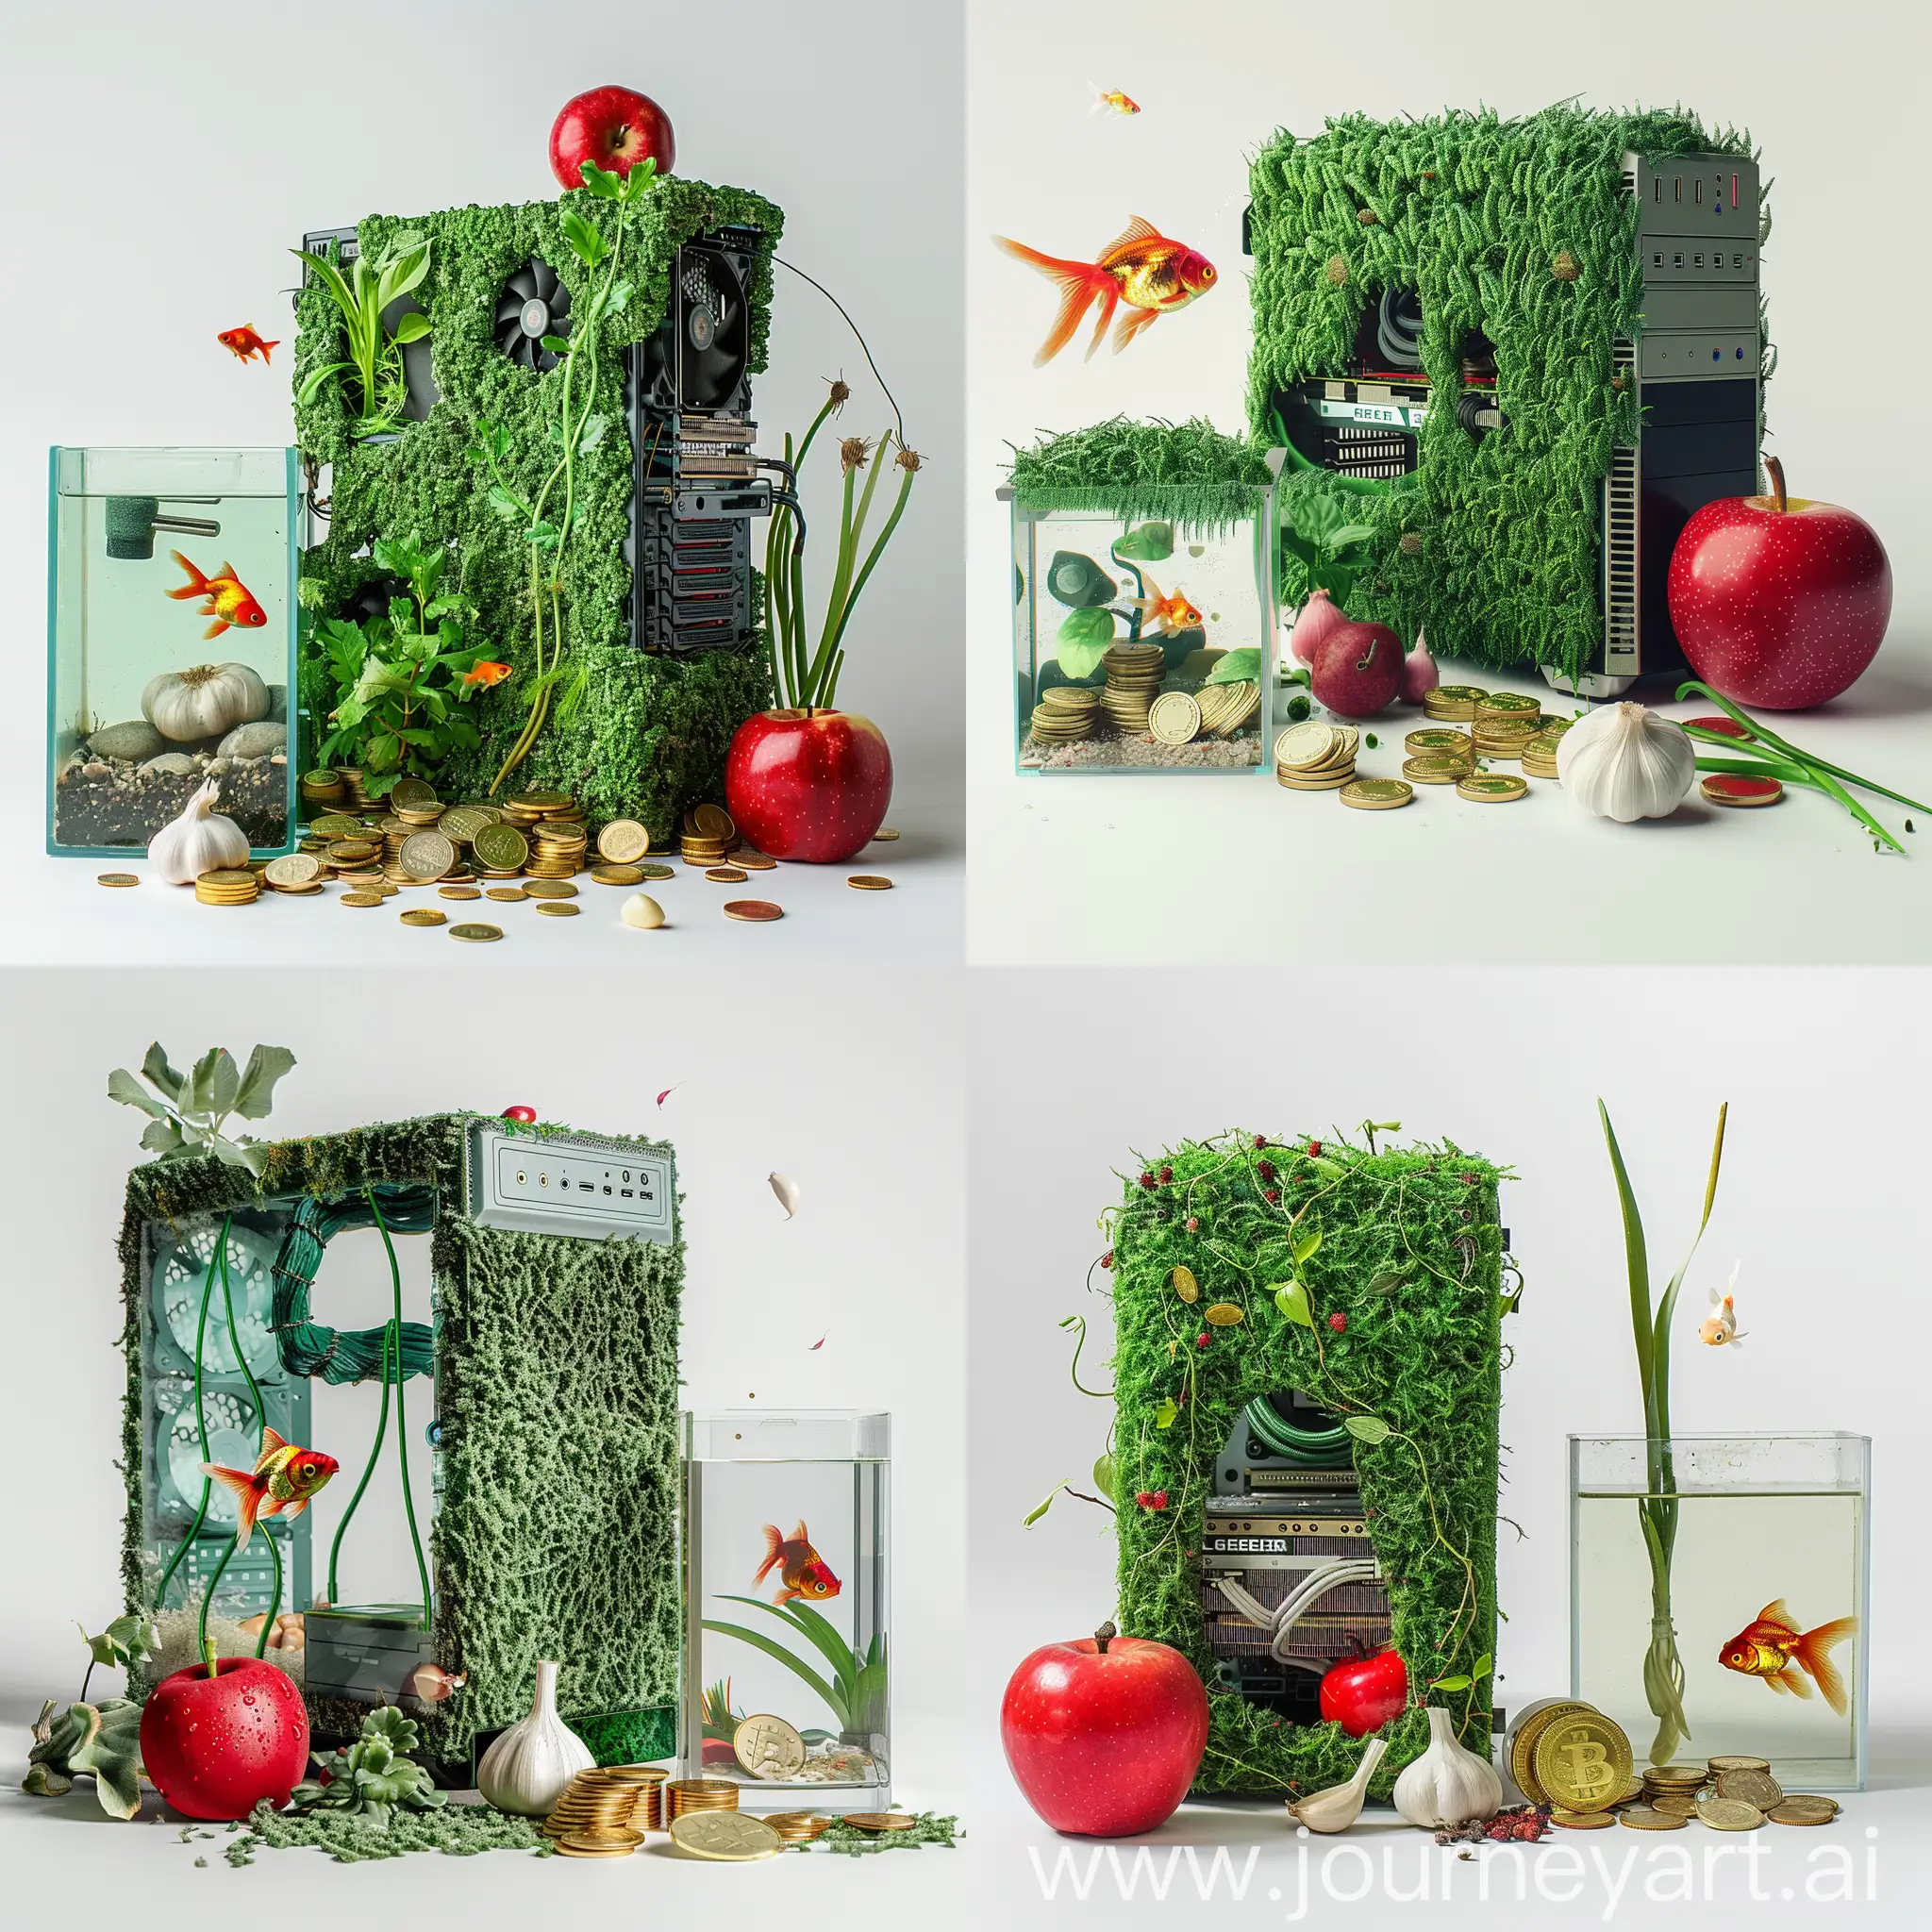 Green-Grasslike-Computer-Case-with-Red-Apple-Garlic-Gold-Coins-and-Goldfish-Tank